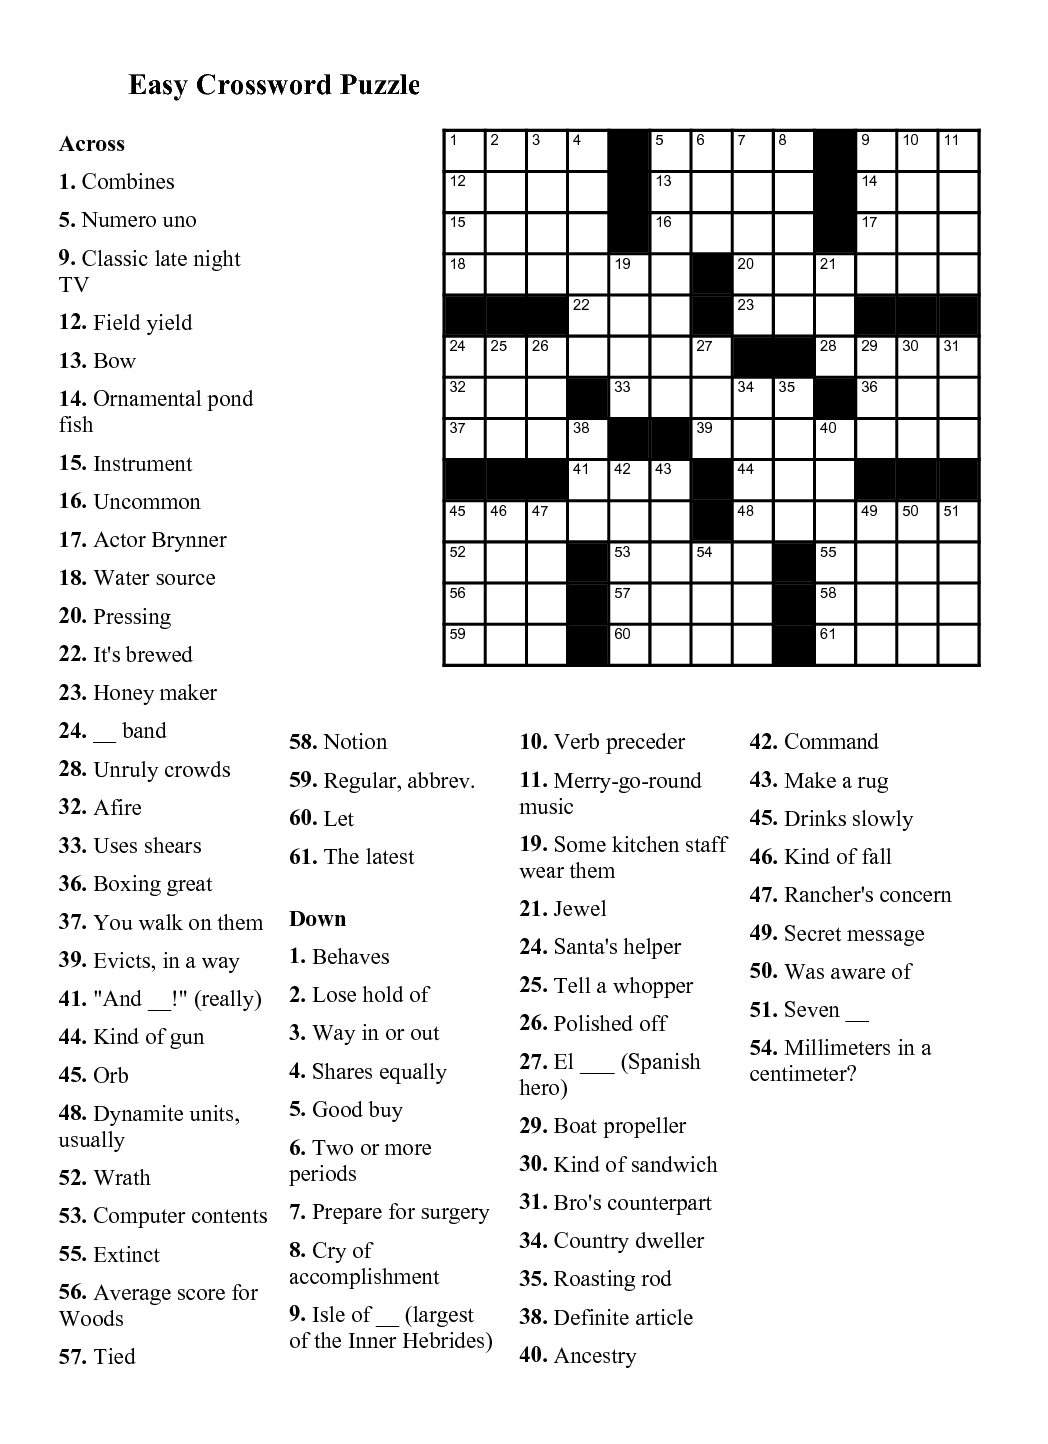 How To Make A Crossword Puzzle Free Printable Printable Crossword Puzzles - Makes It Easier Crossword